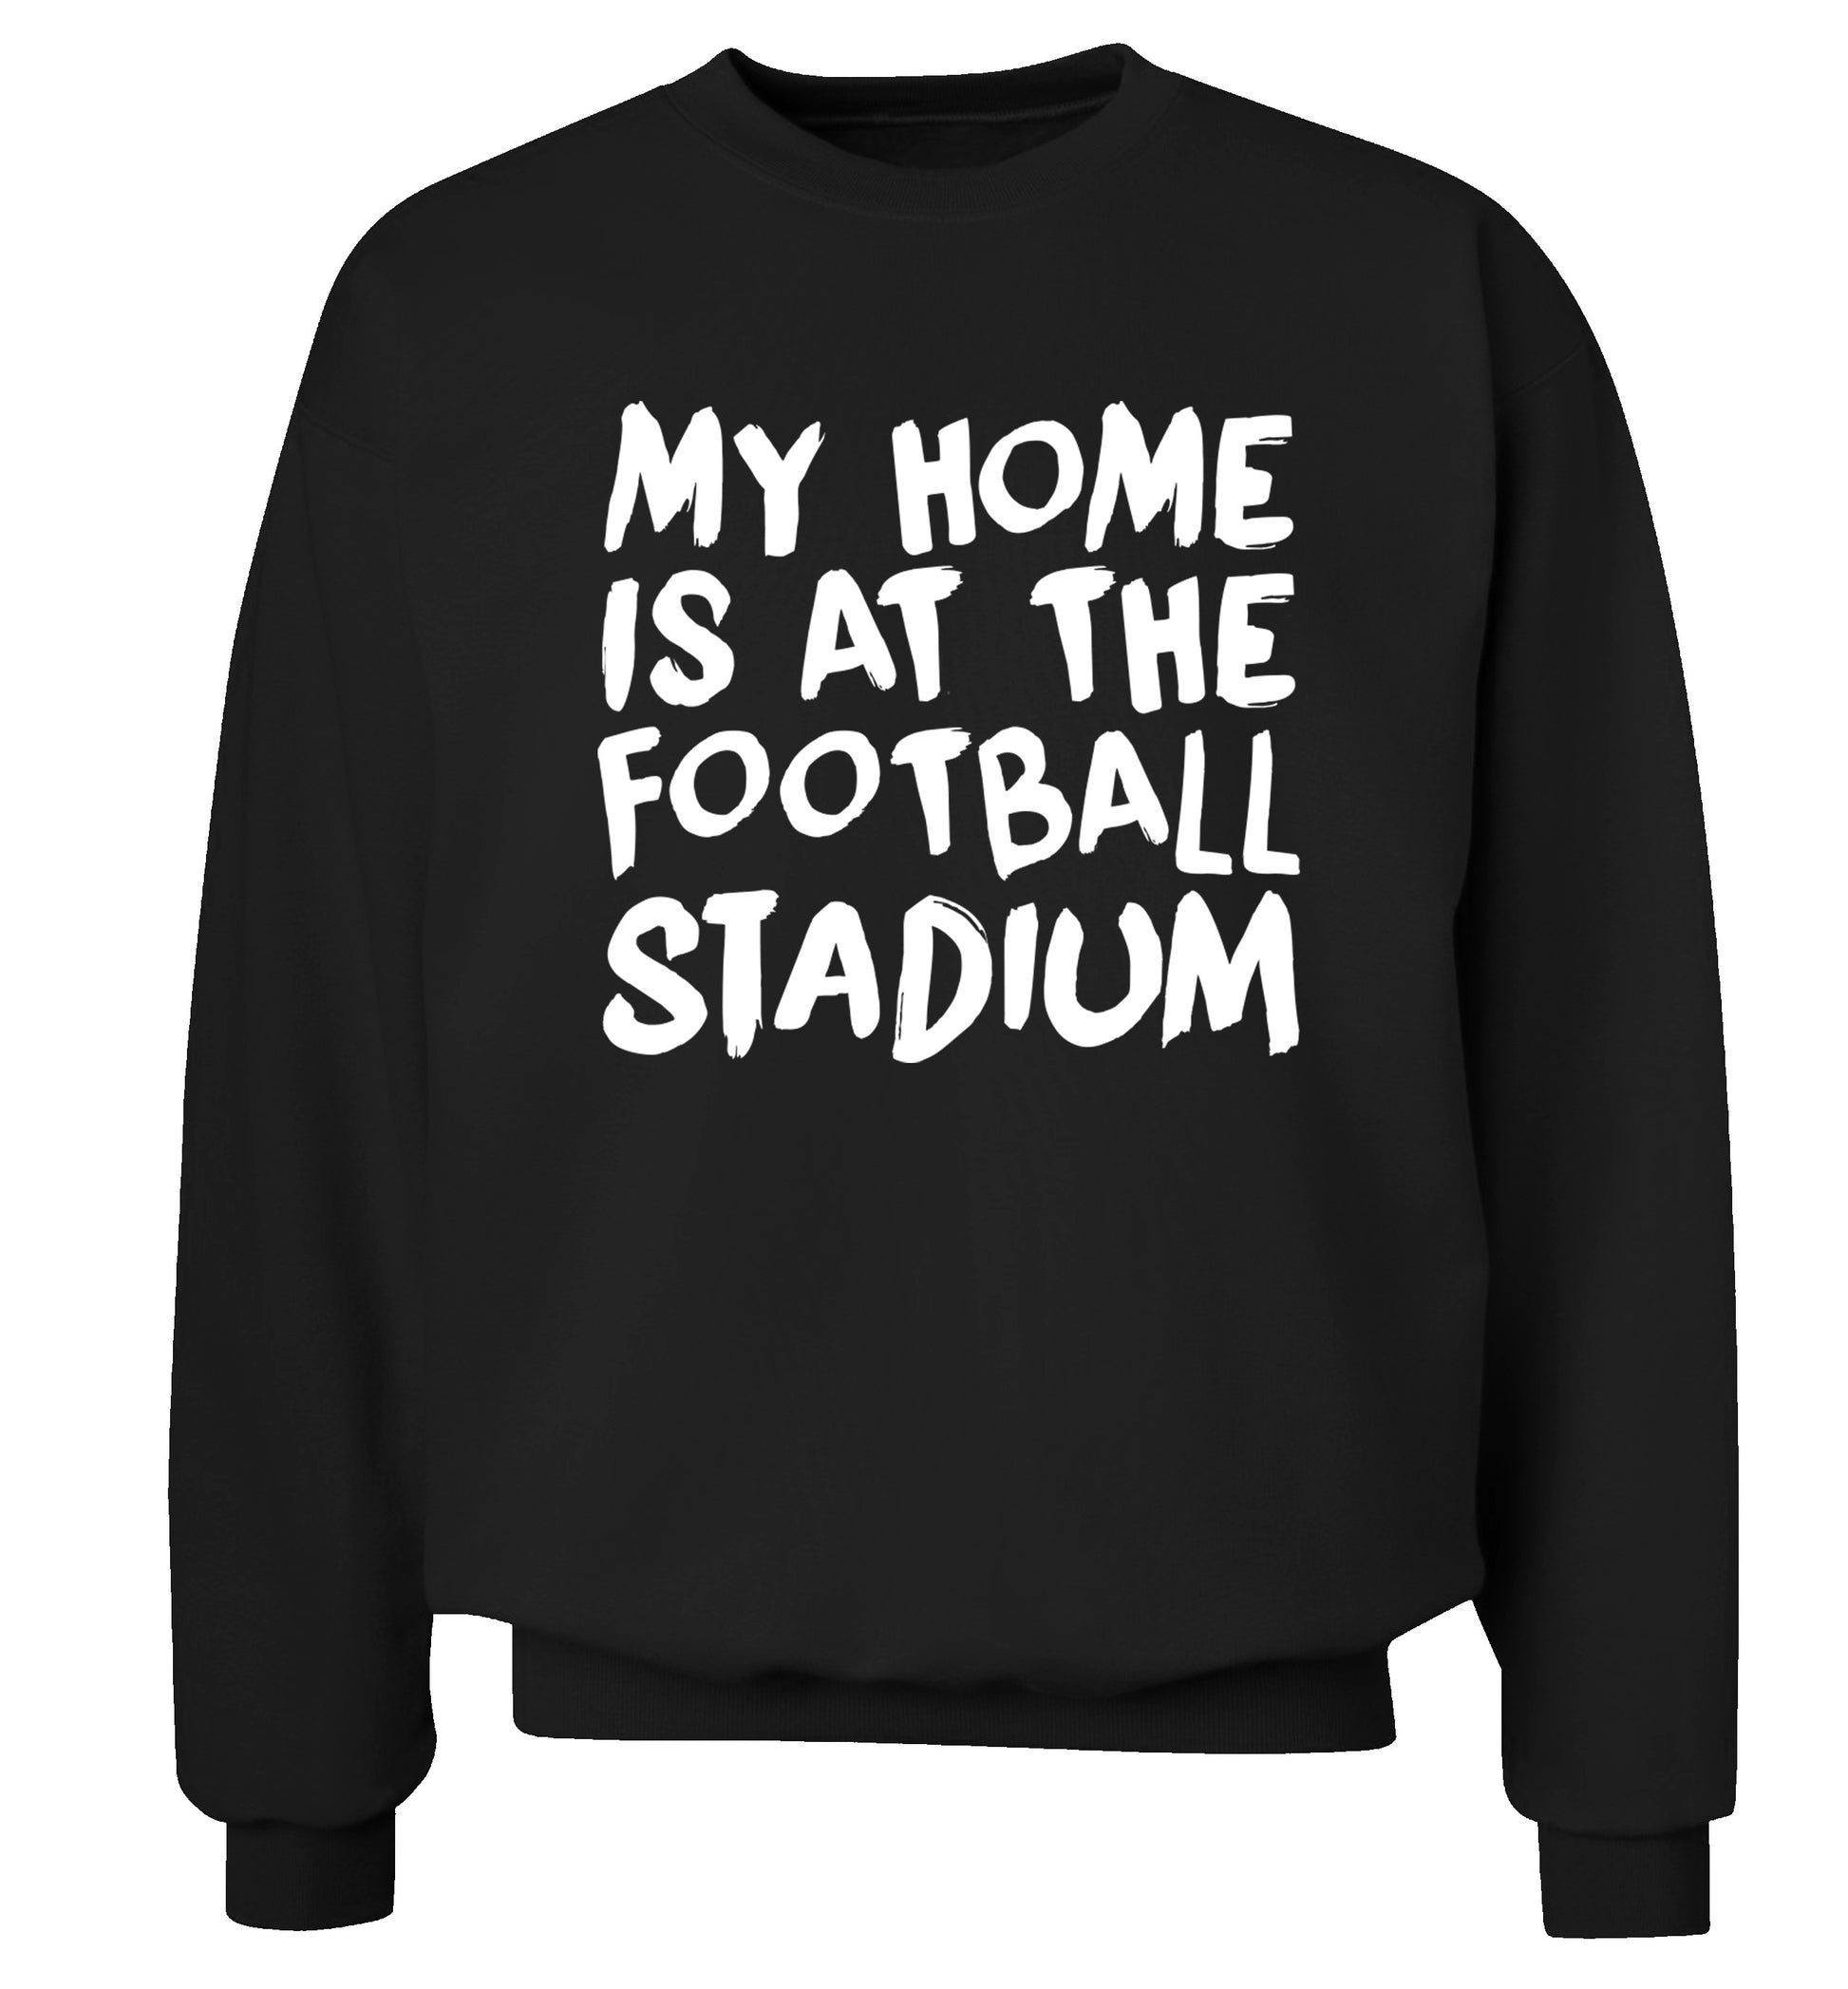 My home is at the football stadium Adult's unisex black Sweater 2XL